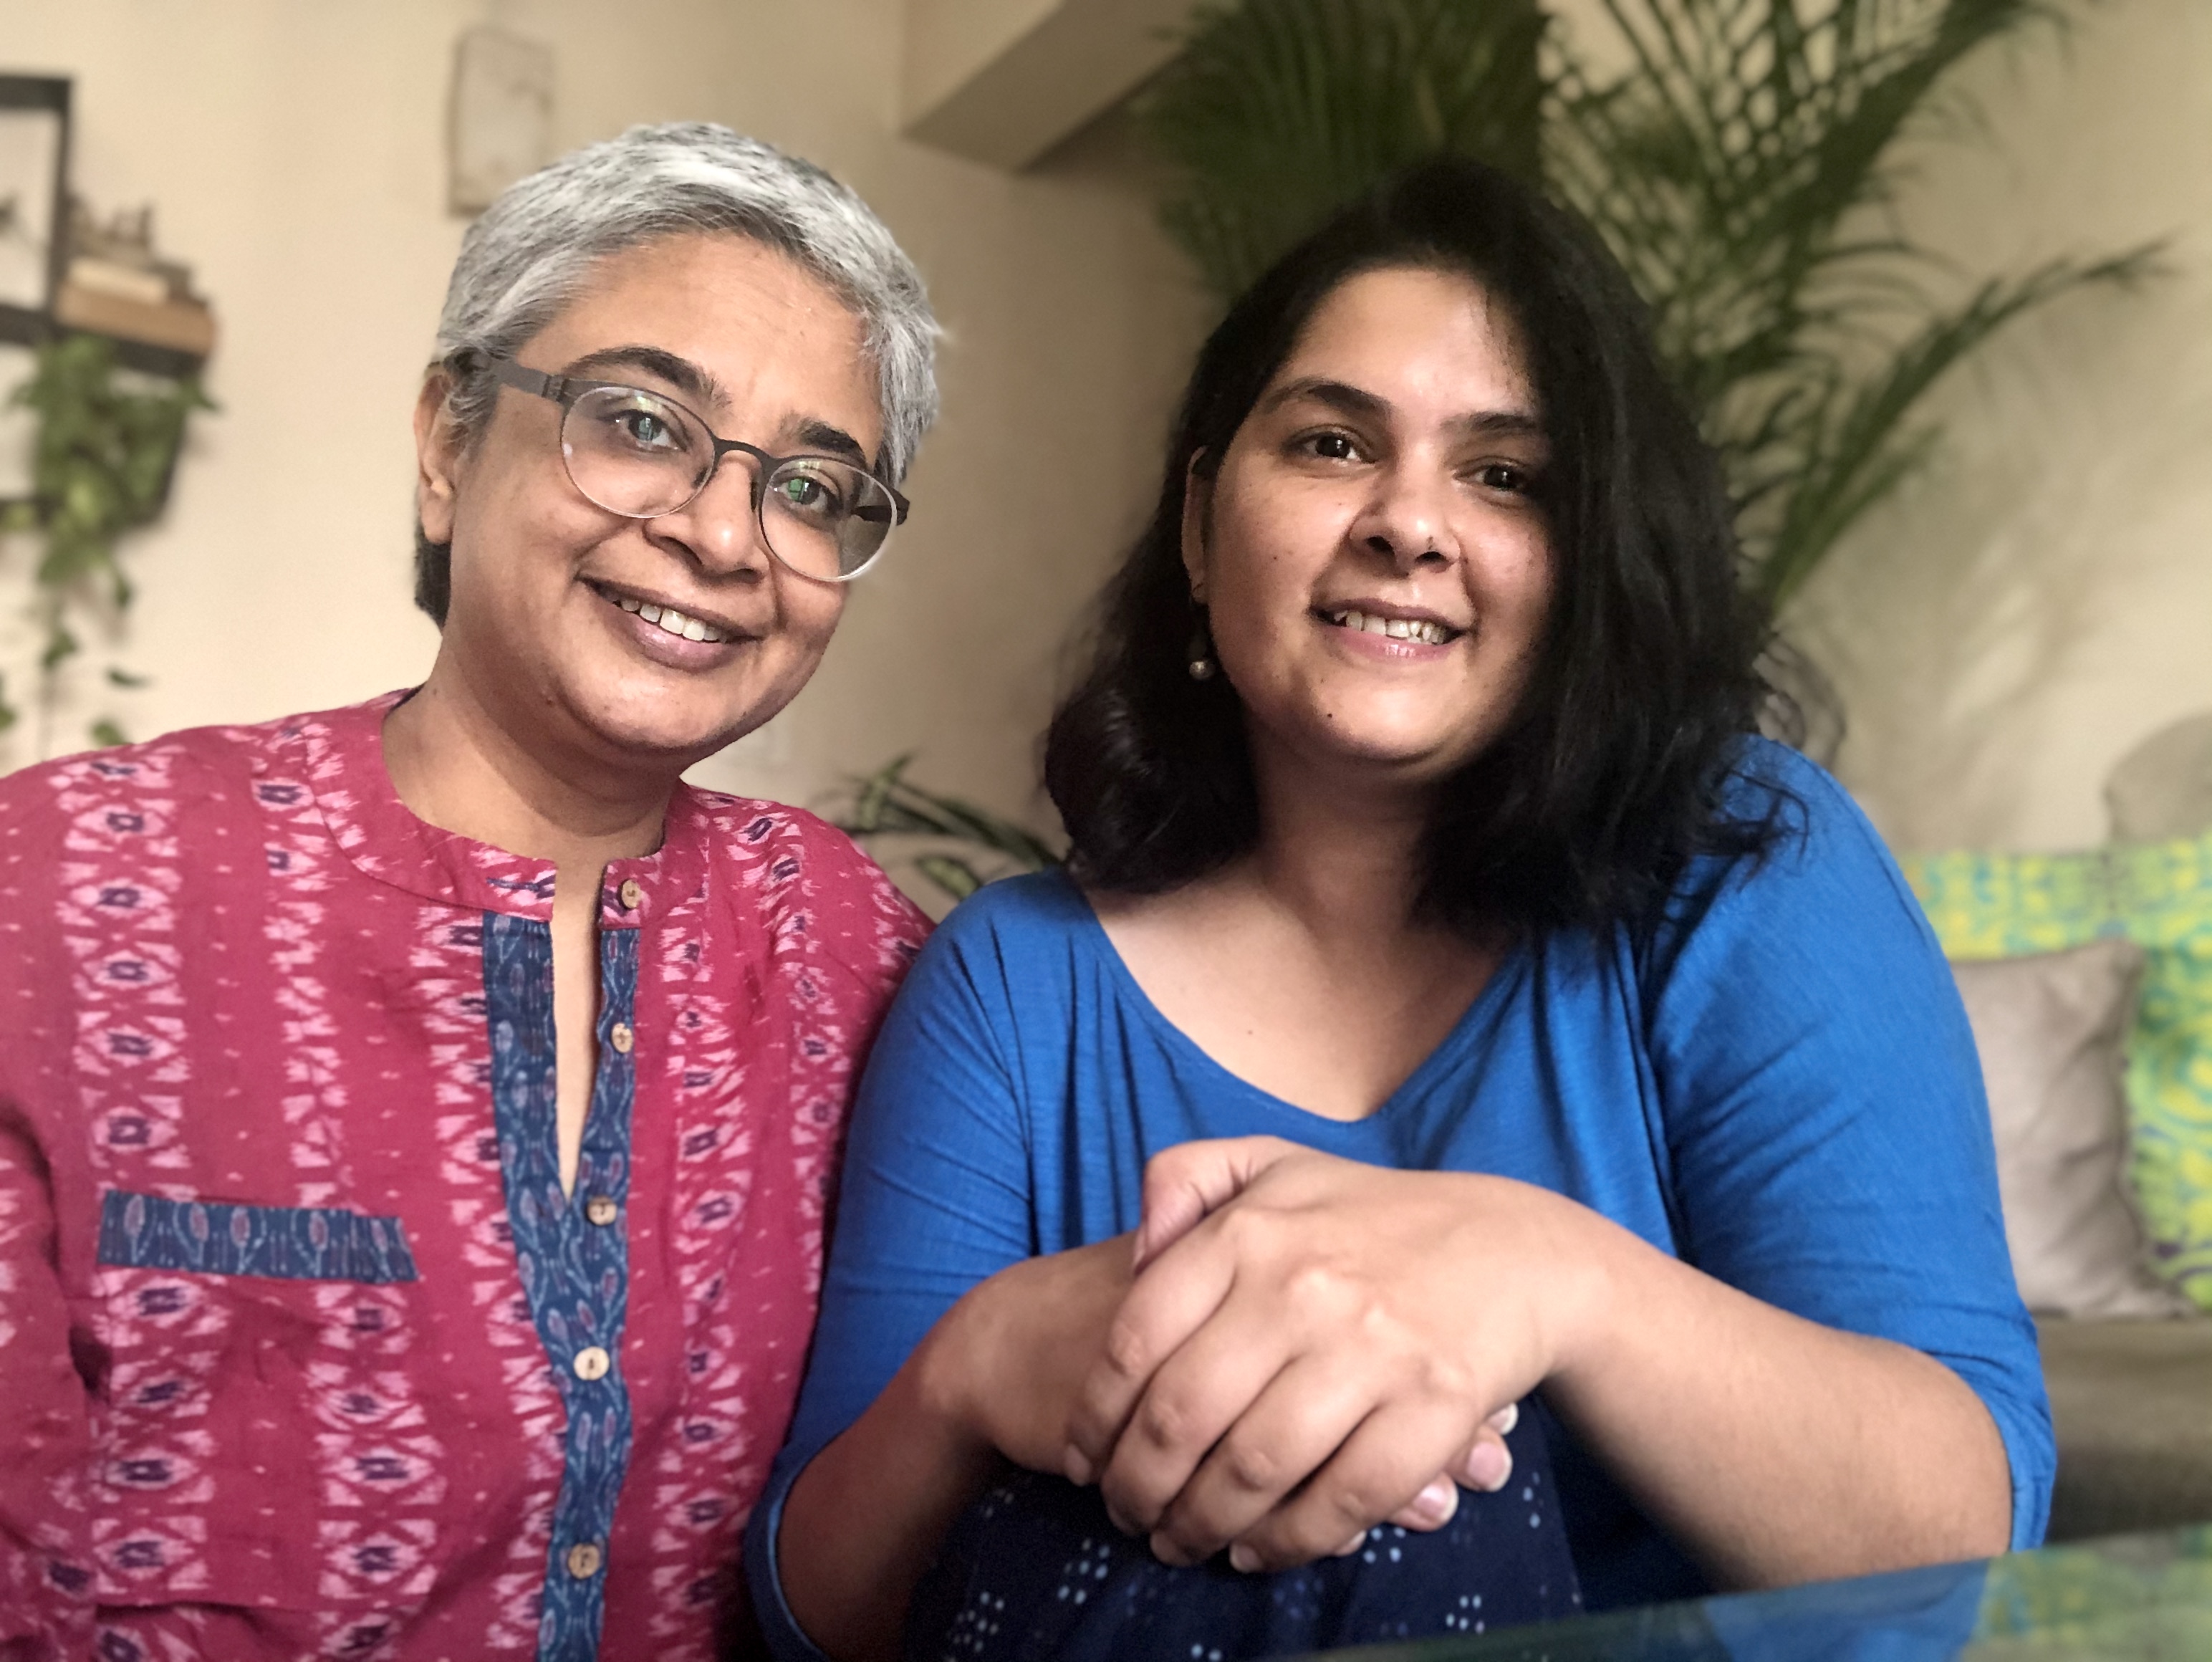 Kavita Arora (left) and Ankita Khanna (right) petitioned a Delhi court in October 2020 for the constitutional right to marry—arguing that without official recognition, they are "strangers in law." (Courtesy Kavita Arora and Ankita Khanna)